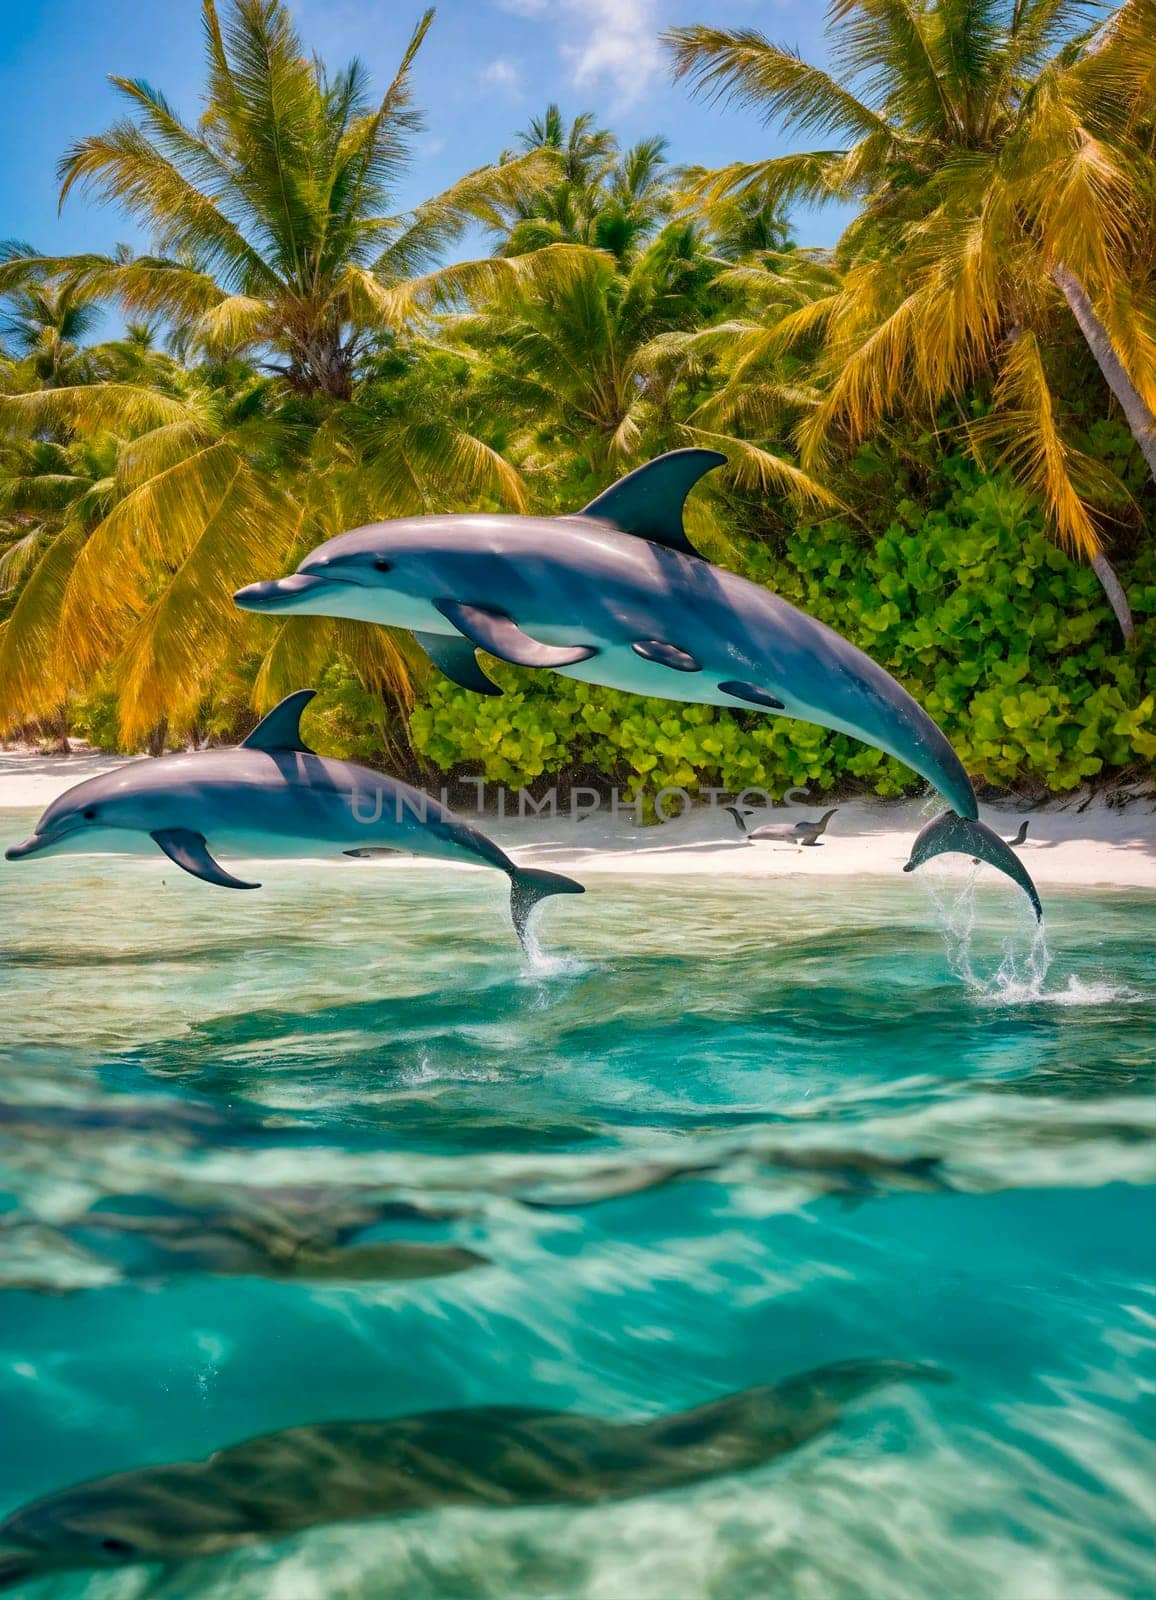 dolphins jump out of the sea. Selective focus. animal.